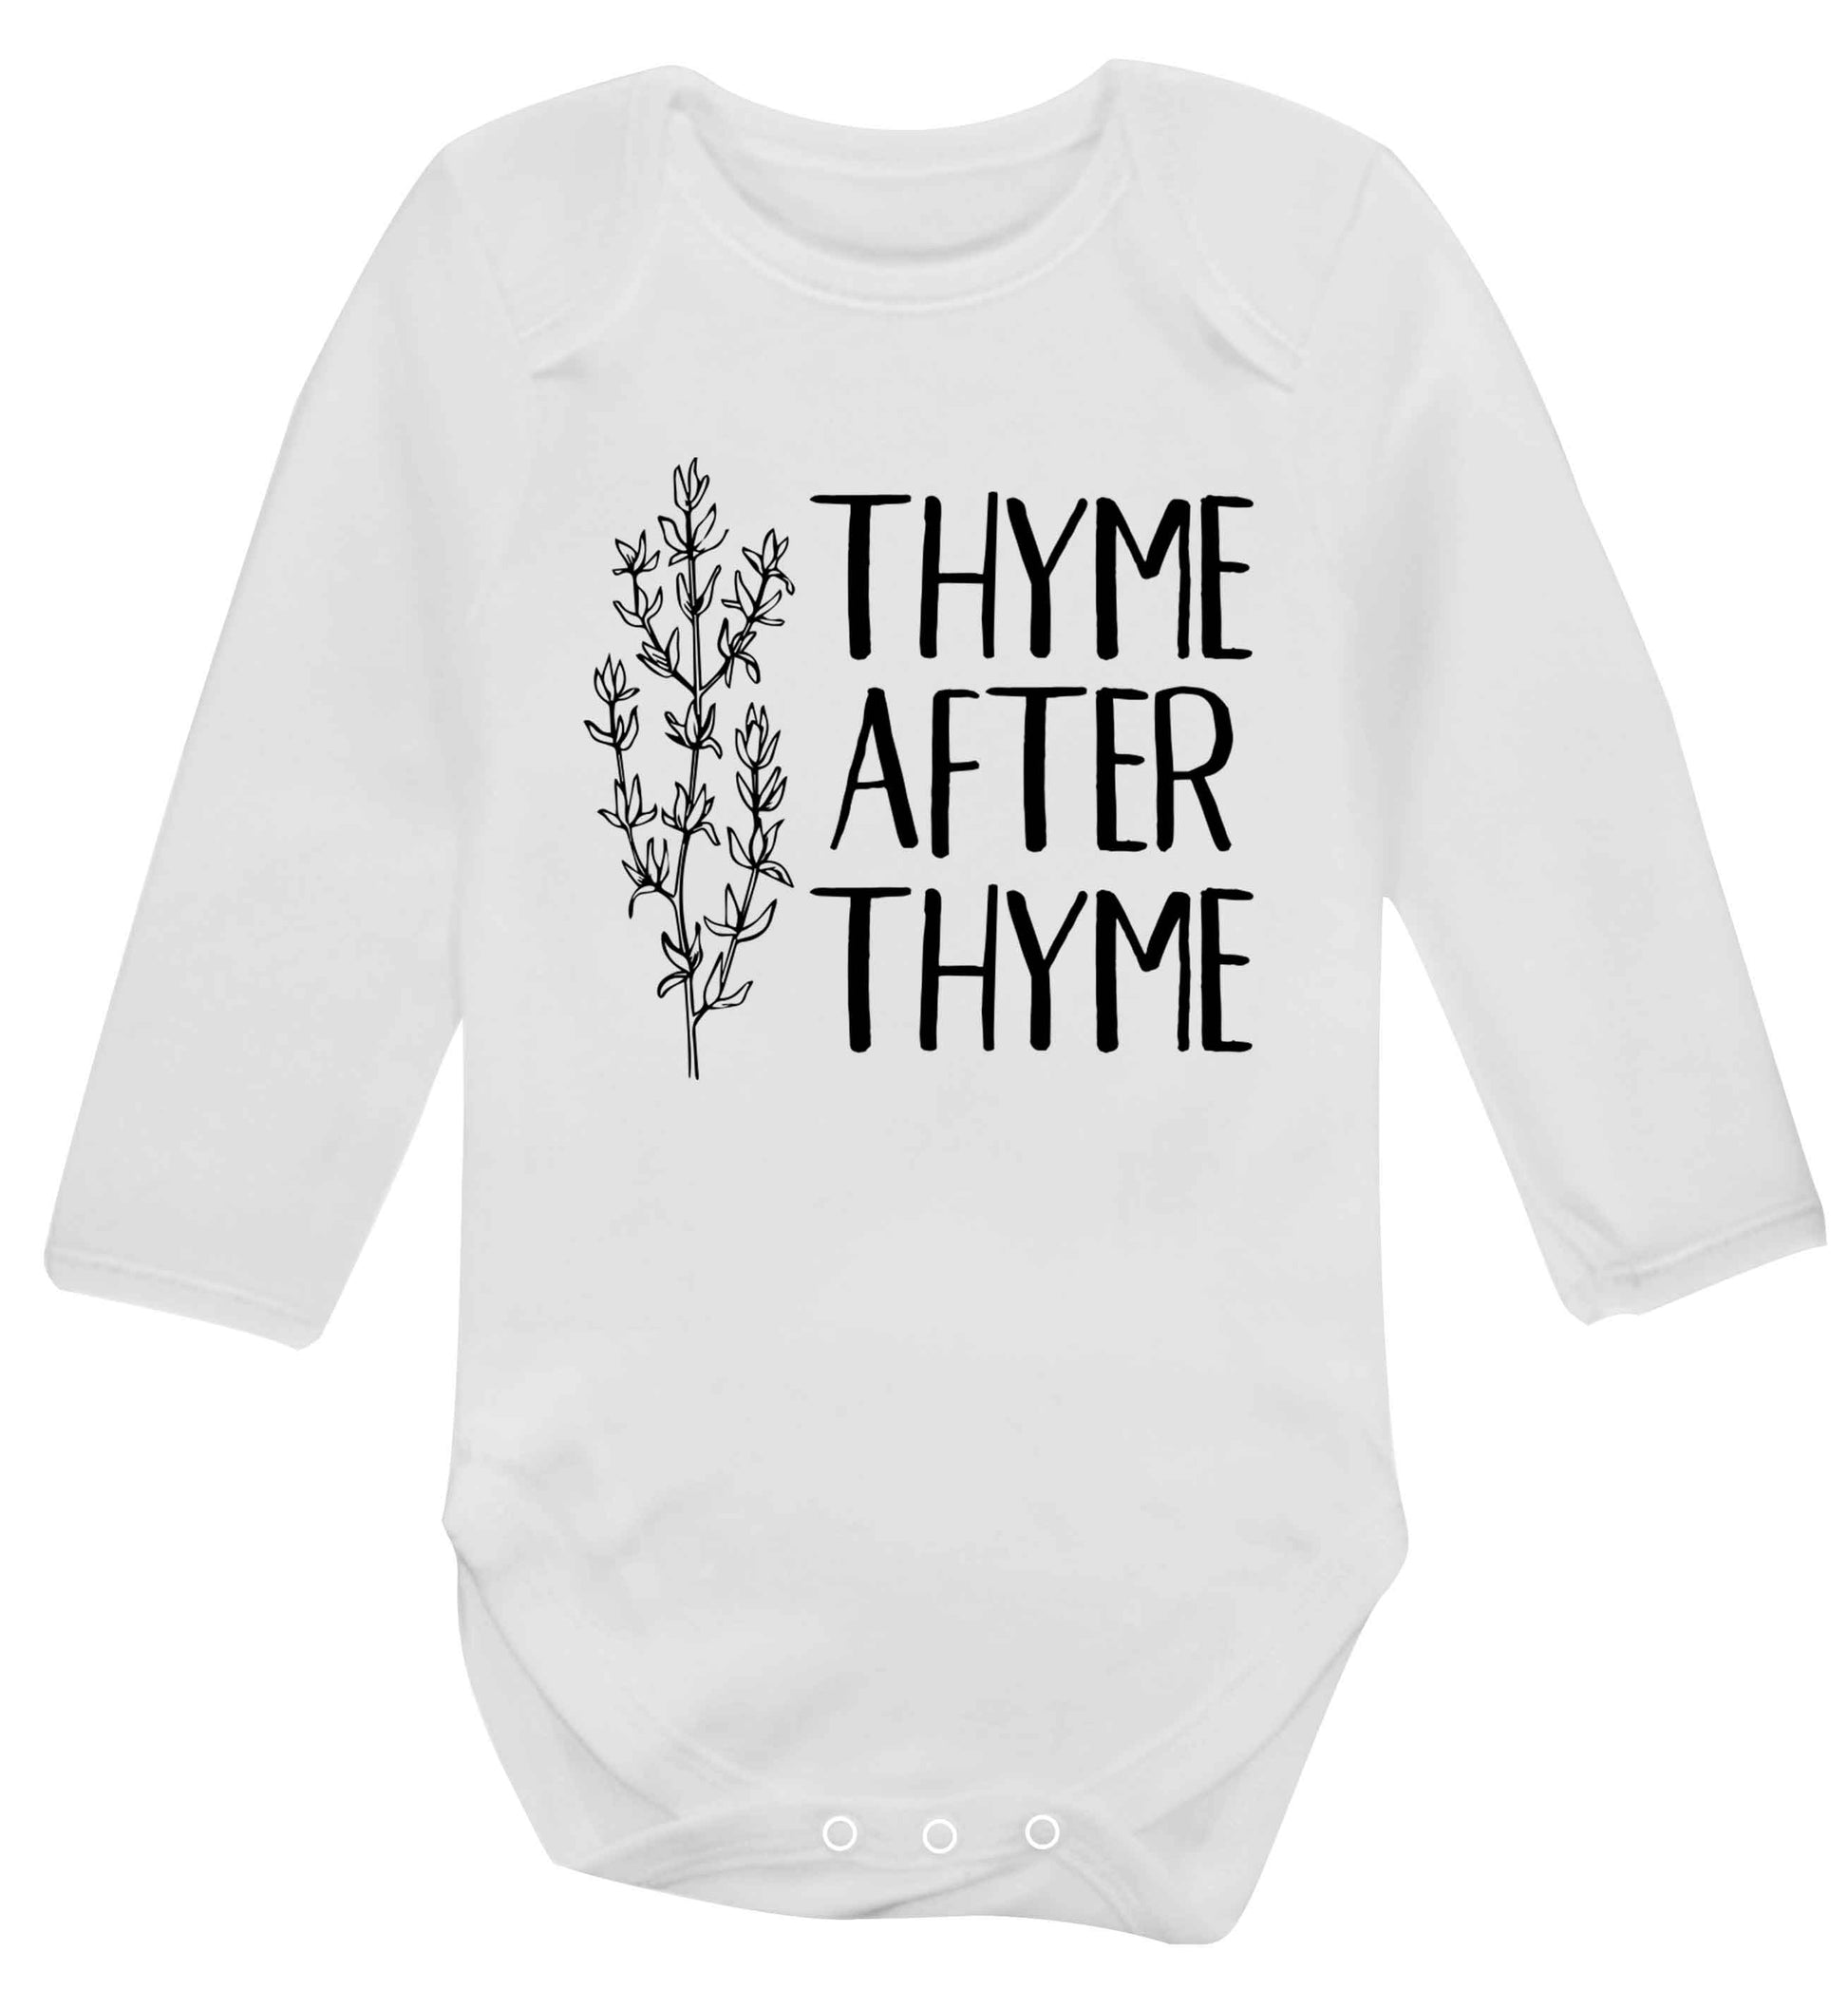 Thyme after thyme Baby Vest long sleeved white 6-12 months